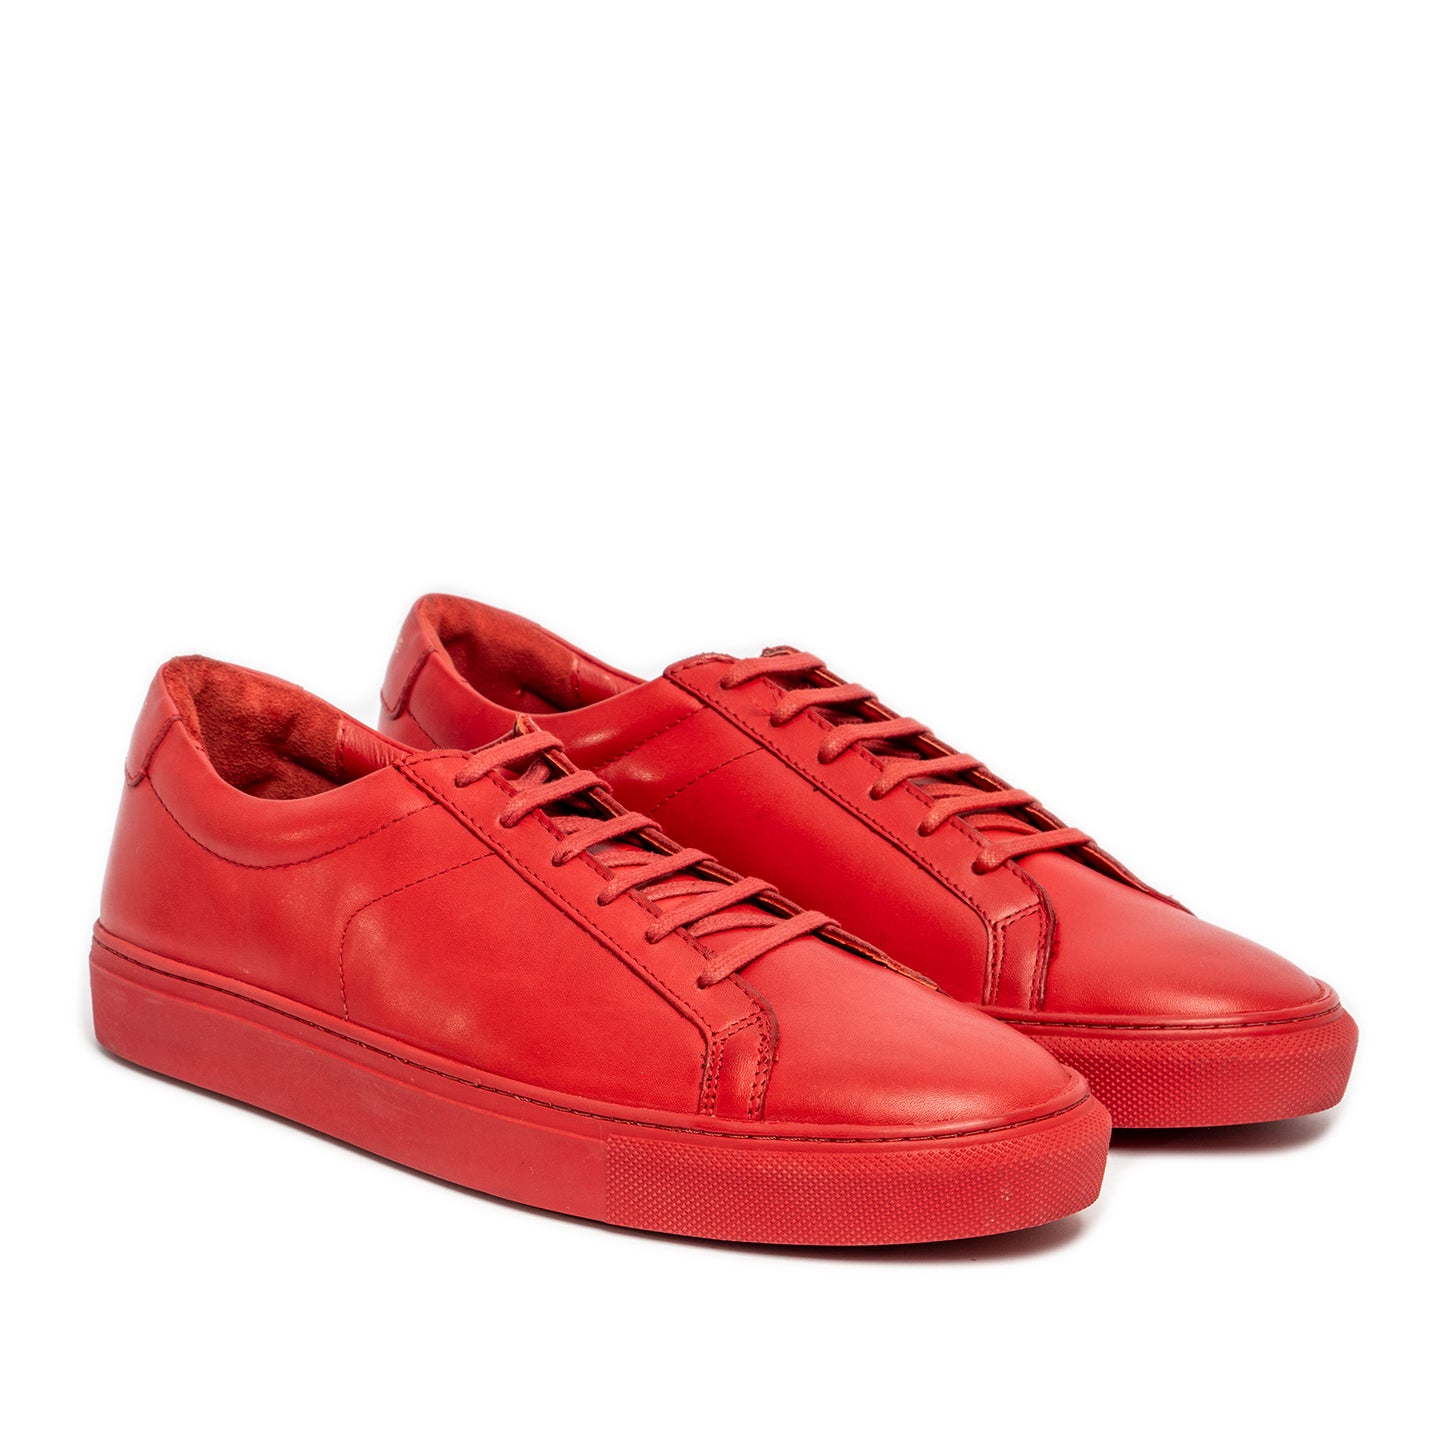 Men's red leather trainers with red sole